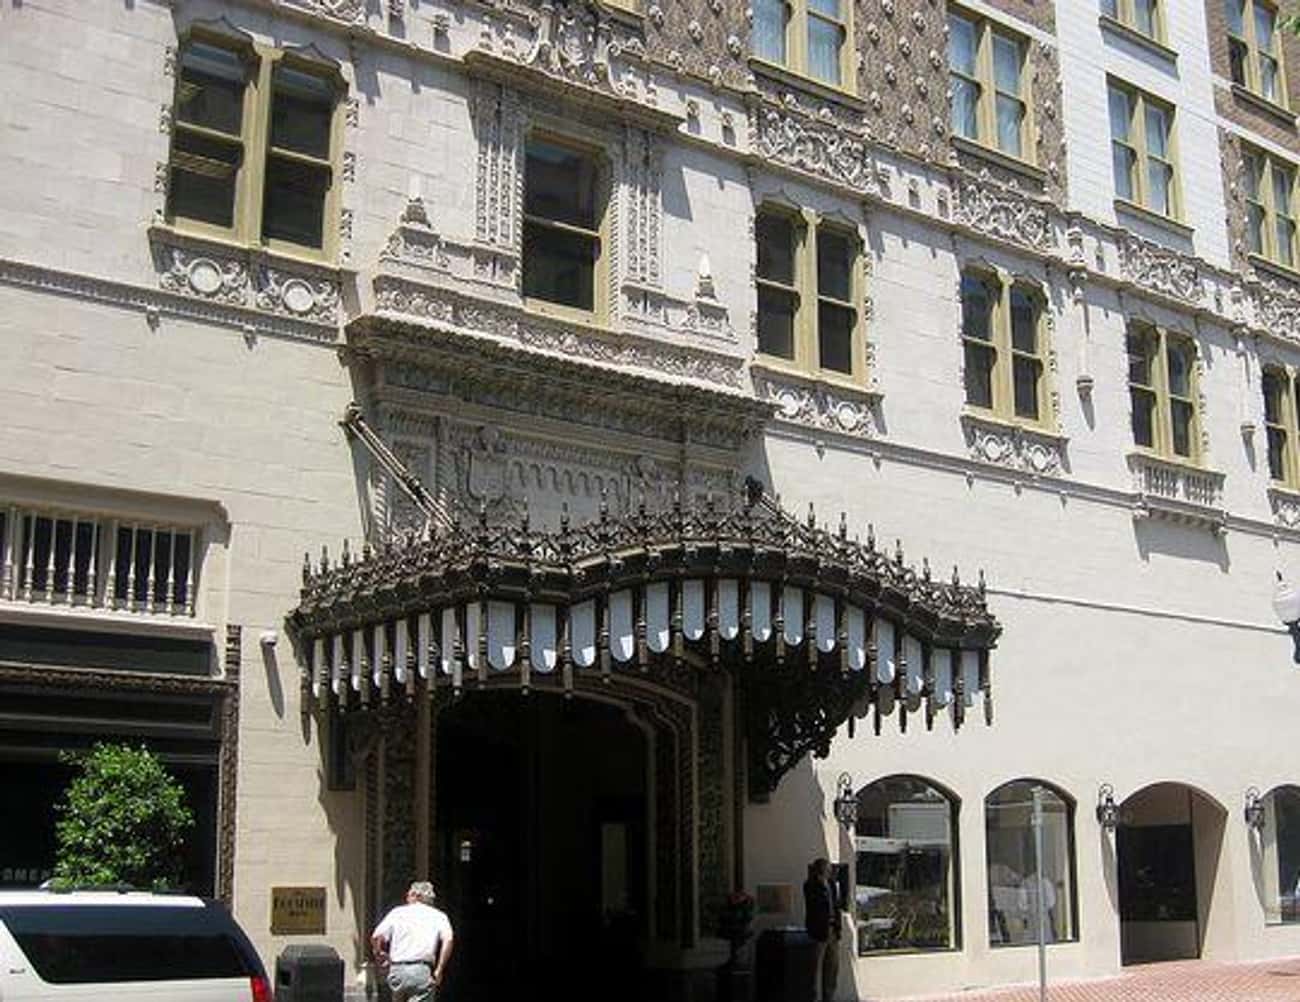 In The Heart Of The French Quarter, The Fairmont Hotel Offered Infinite Possibilities